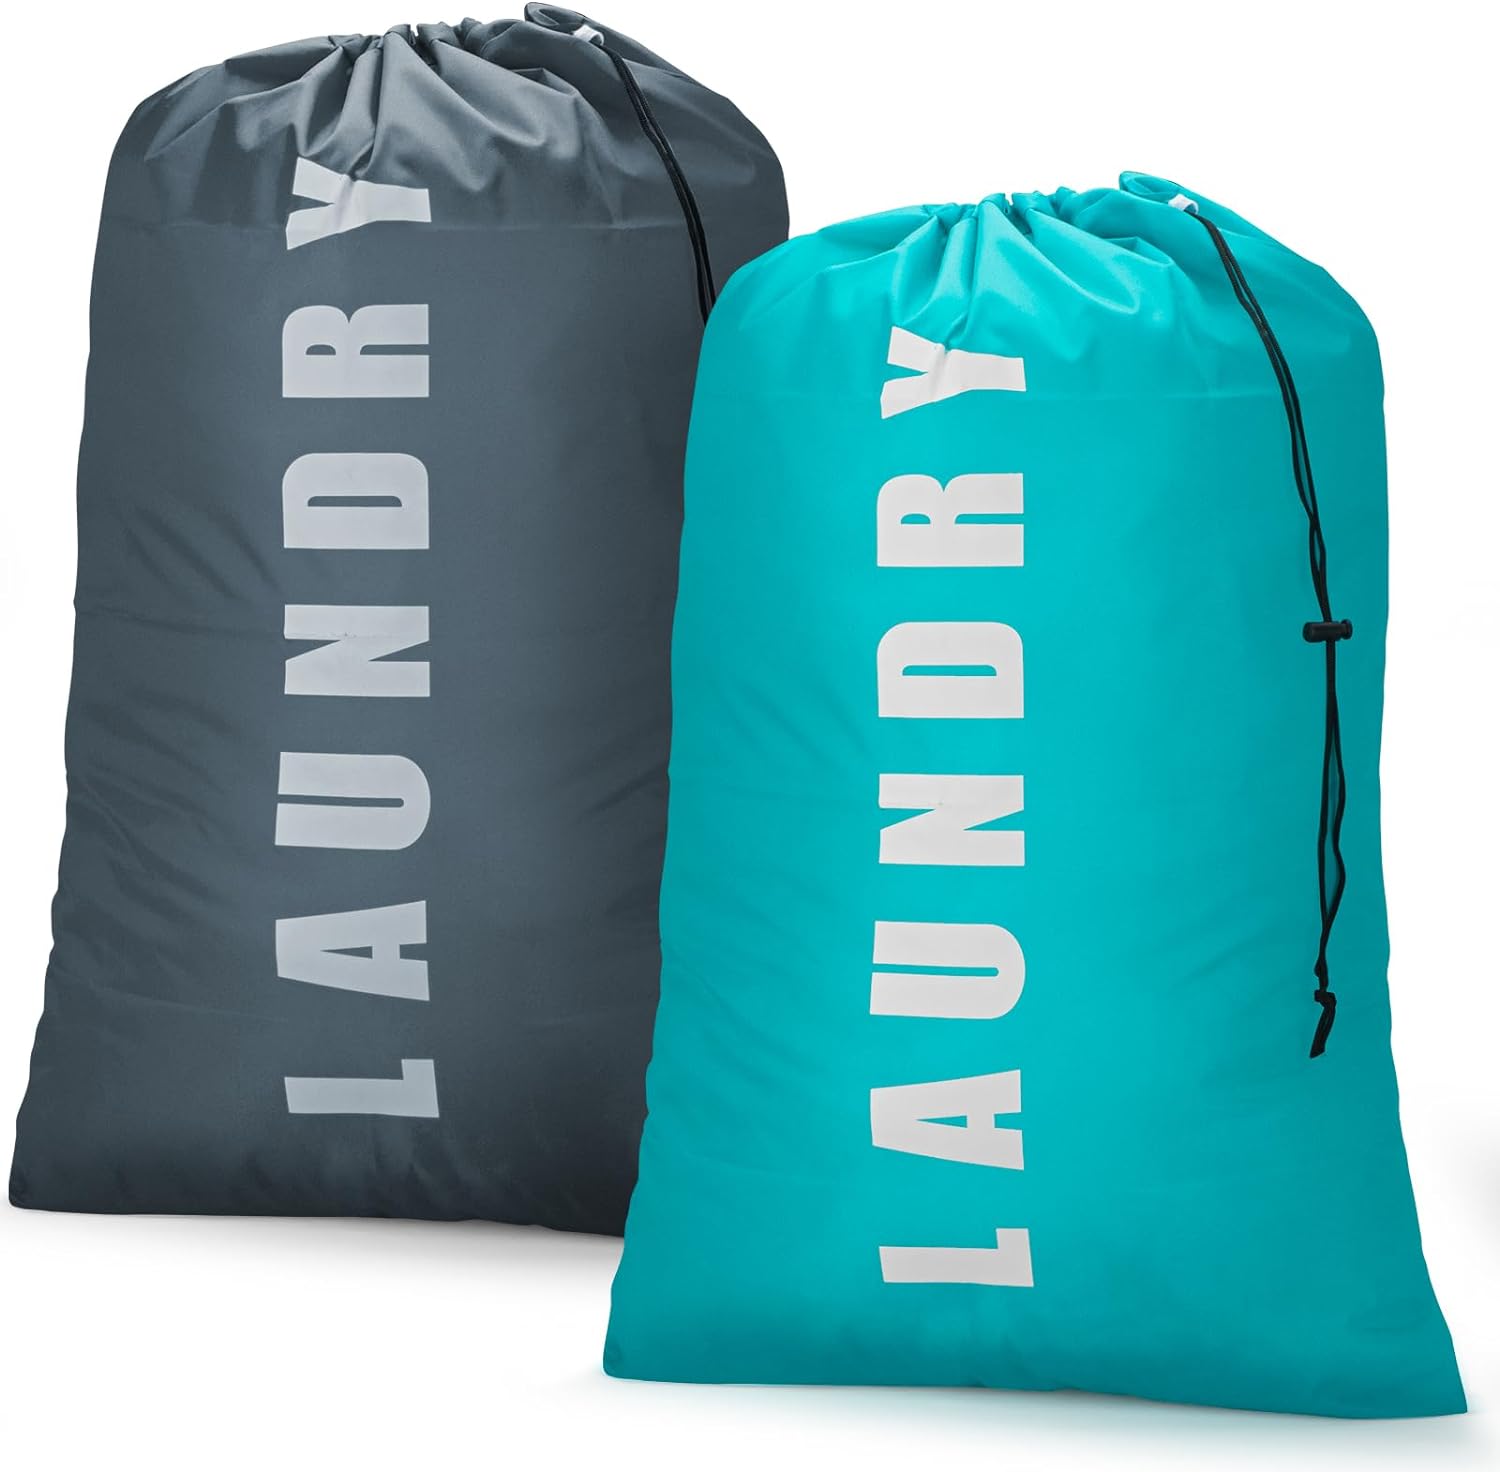 Isink Laundry Bag,2 Pack Travel Laundry Bags for Dirty Clothes,Large Laundry Bags for Traveling,Dirty Clothes Travel Bag,Laundry Bags for Camp, 24 x 36 (Cyan + Gray)